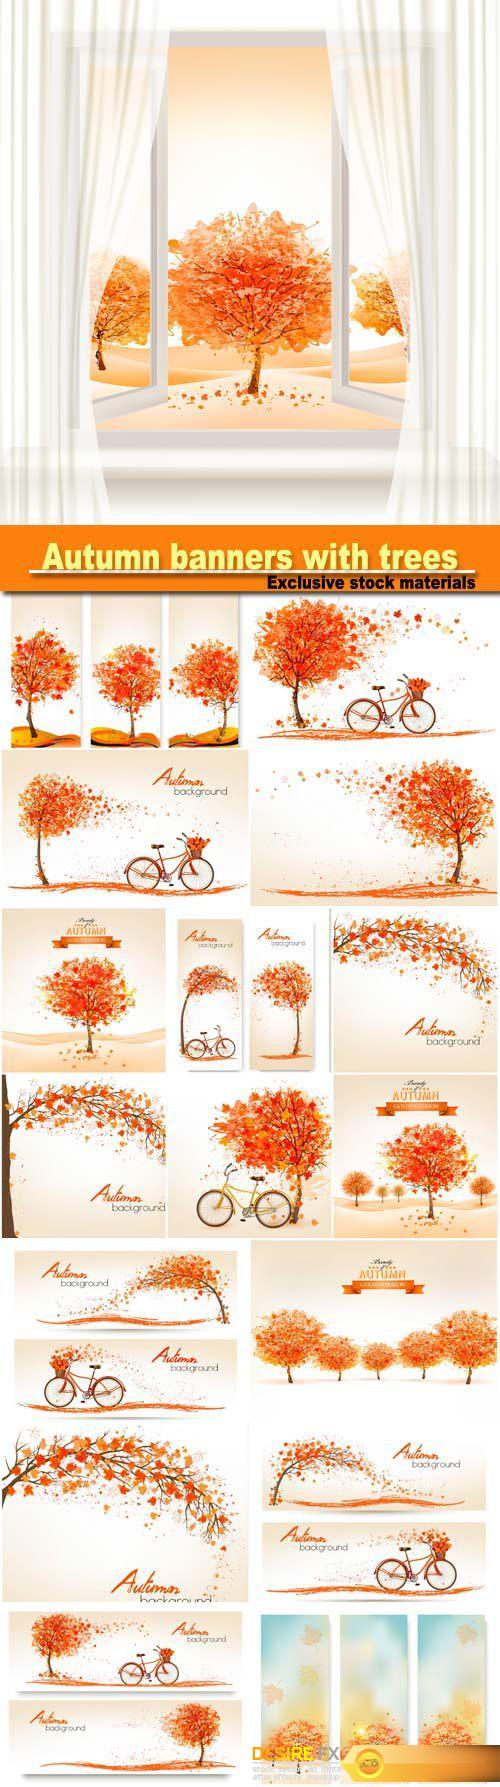 Autumn banners with trees and a bicycle